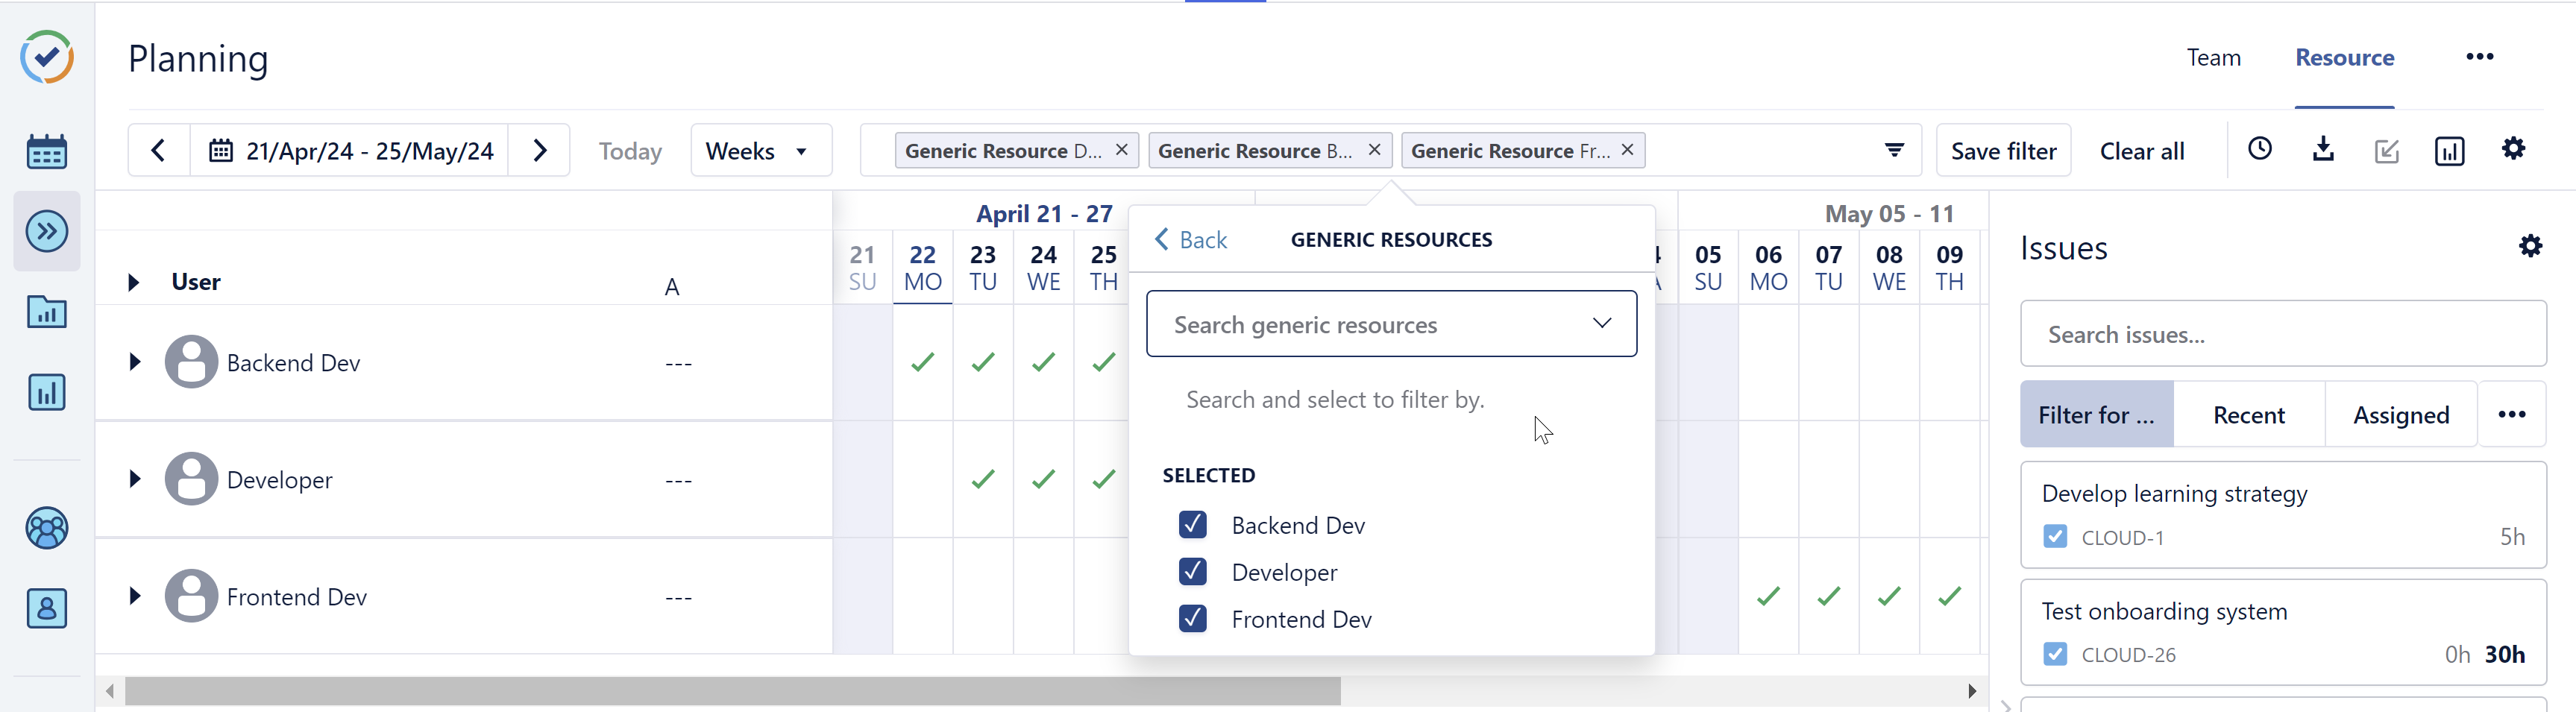 Filtering the Resource Planning screen by generic resources